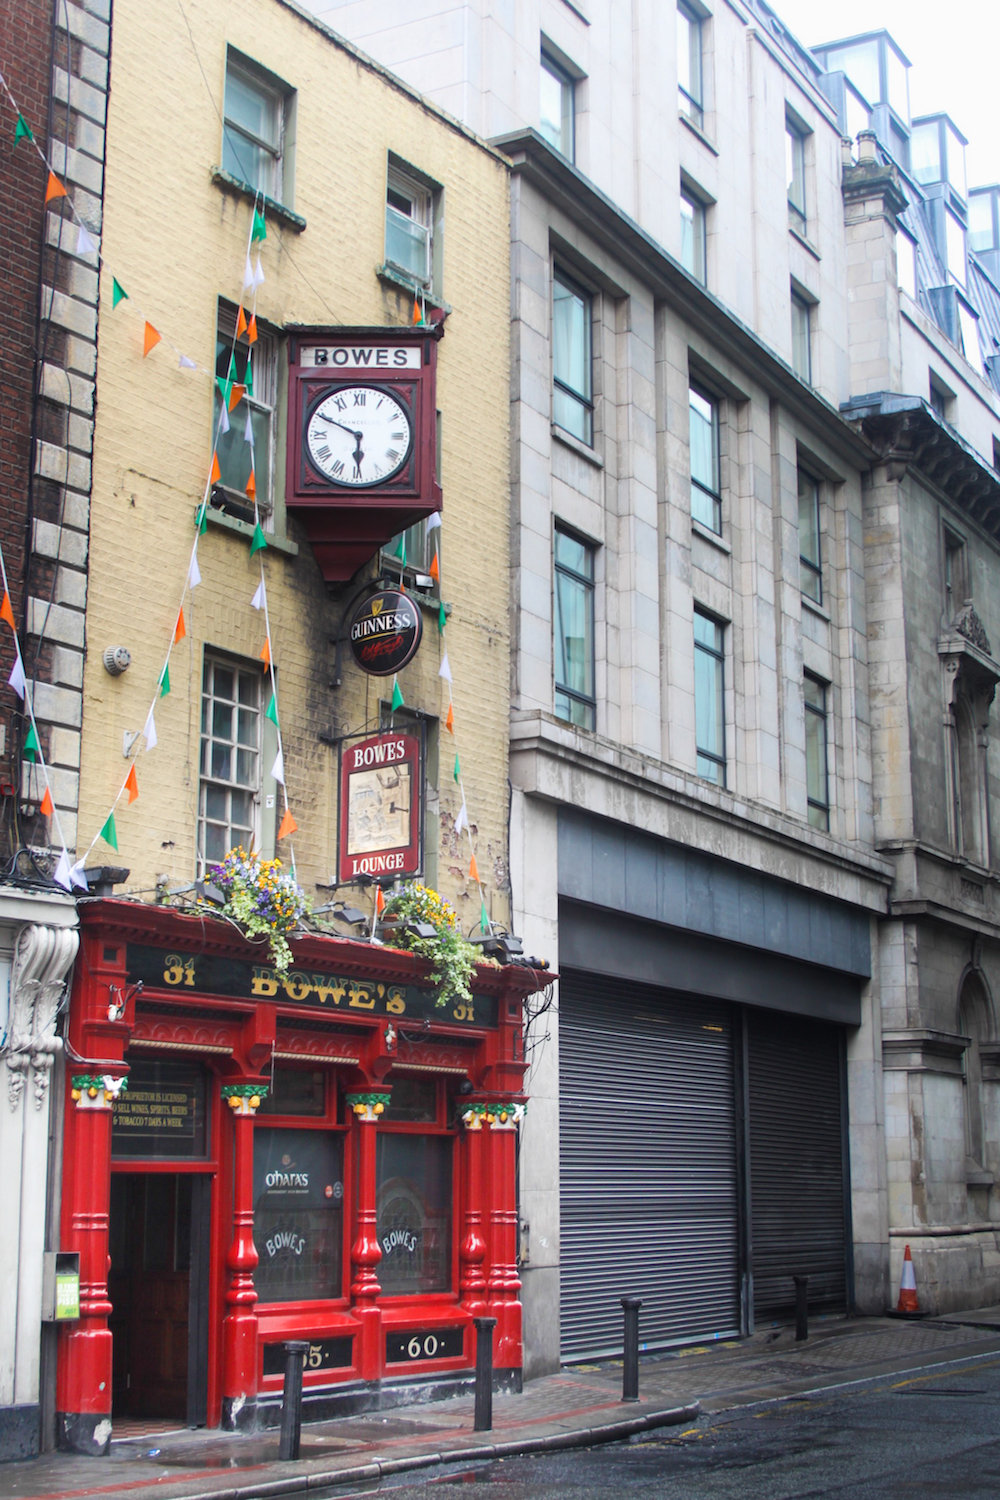 Just another pub in Dublin (Eat Me. Drink Me.)